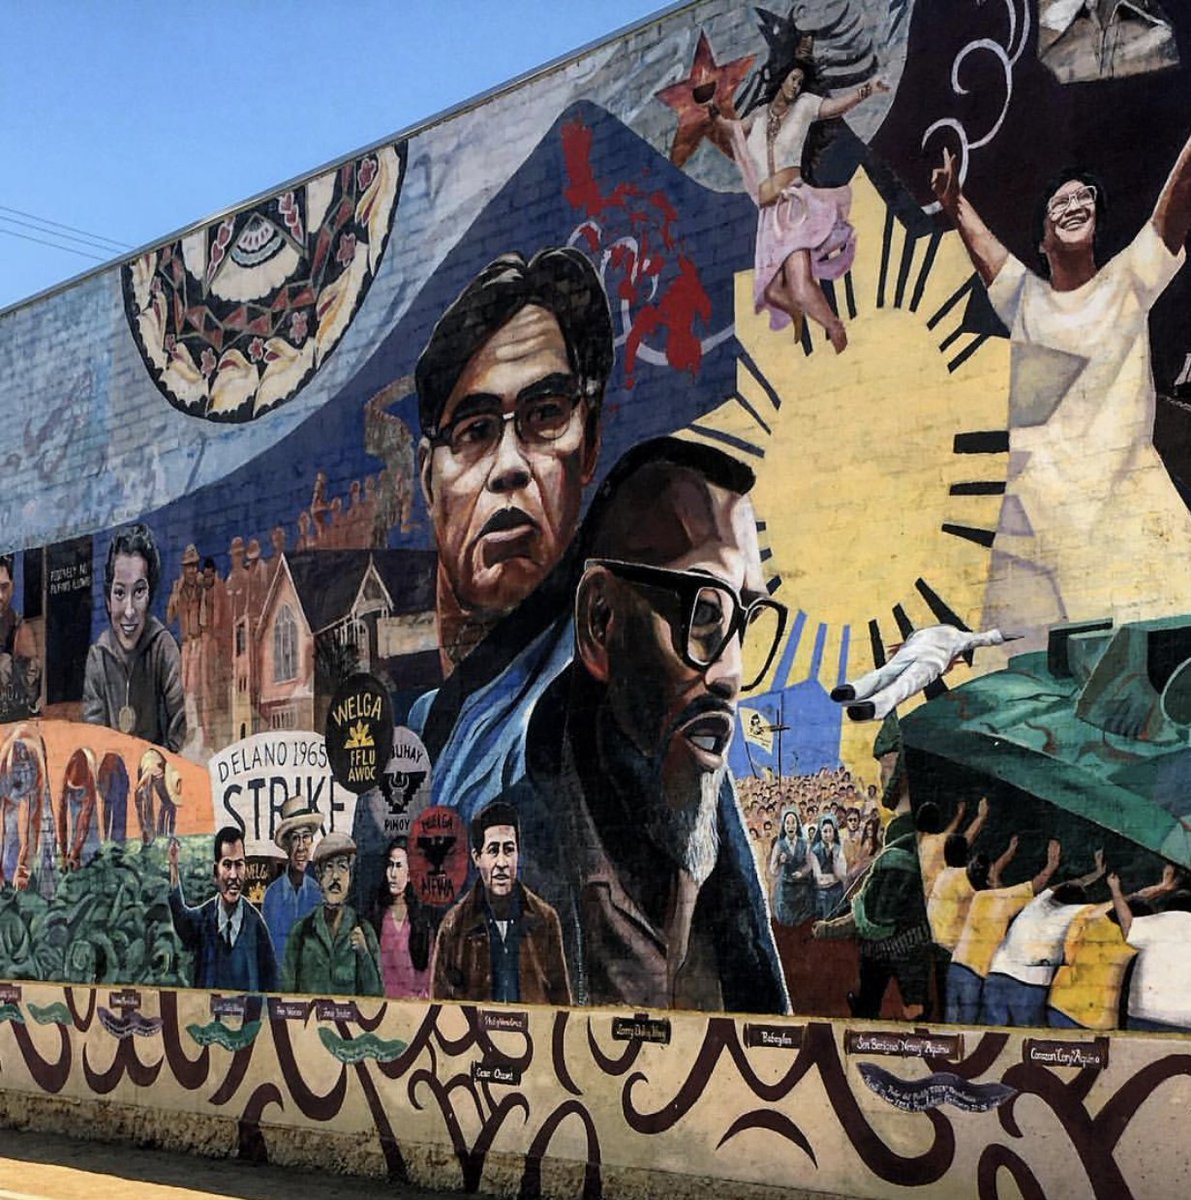 LA Commons on Twitter: "Gintong Kasaysayan Gintong Pamana (Filipino Americans: A Glorious History, A Golden Legacy) Mural is an iconic feature of Unidad Park in Historic FilipinoTown. Explore Filipinotown with us this